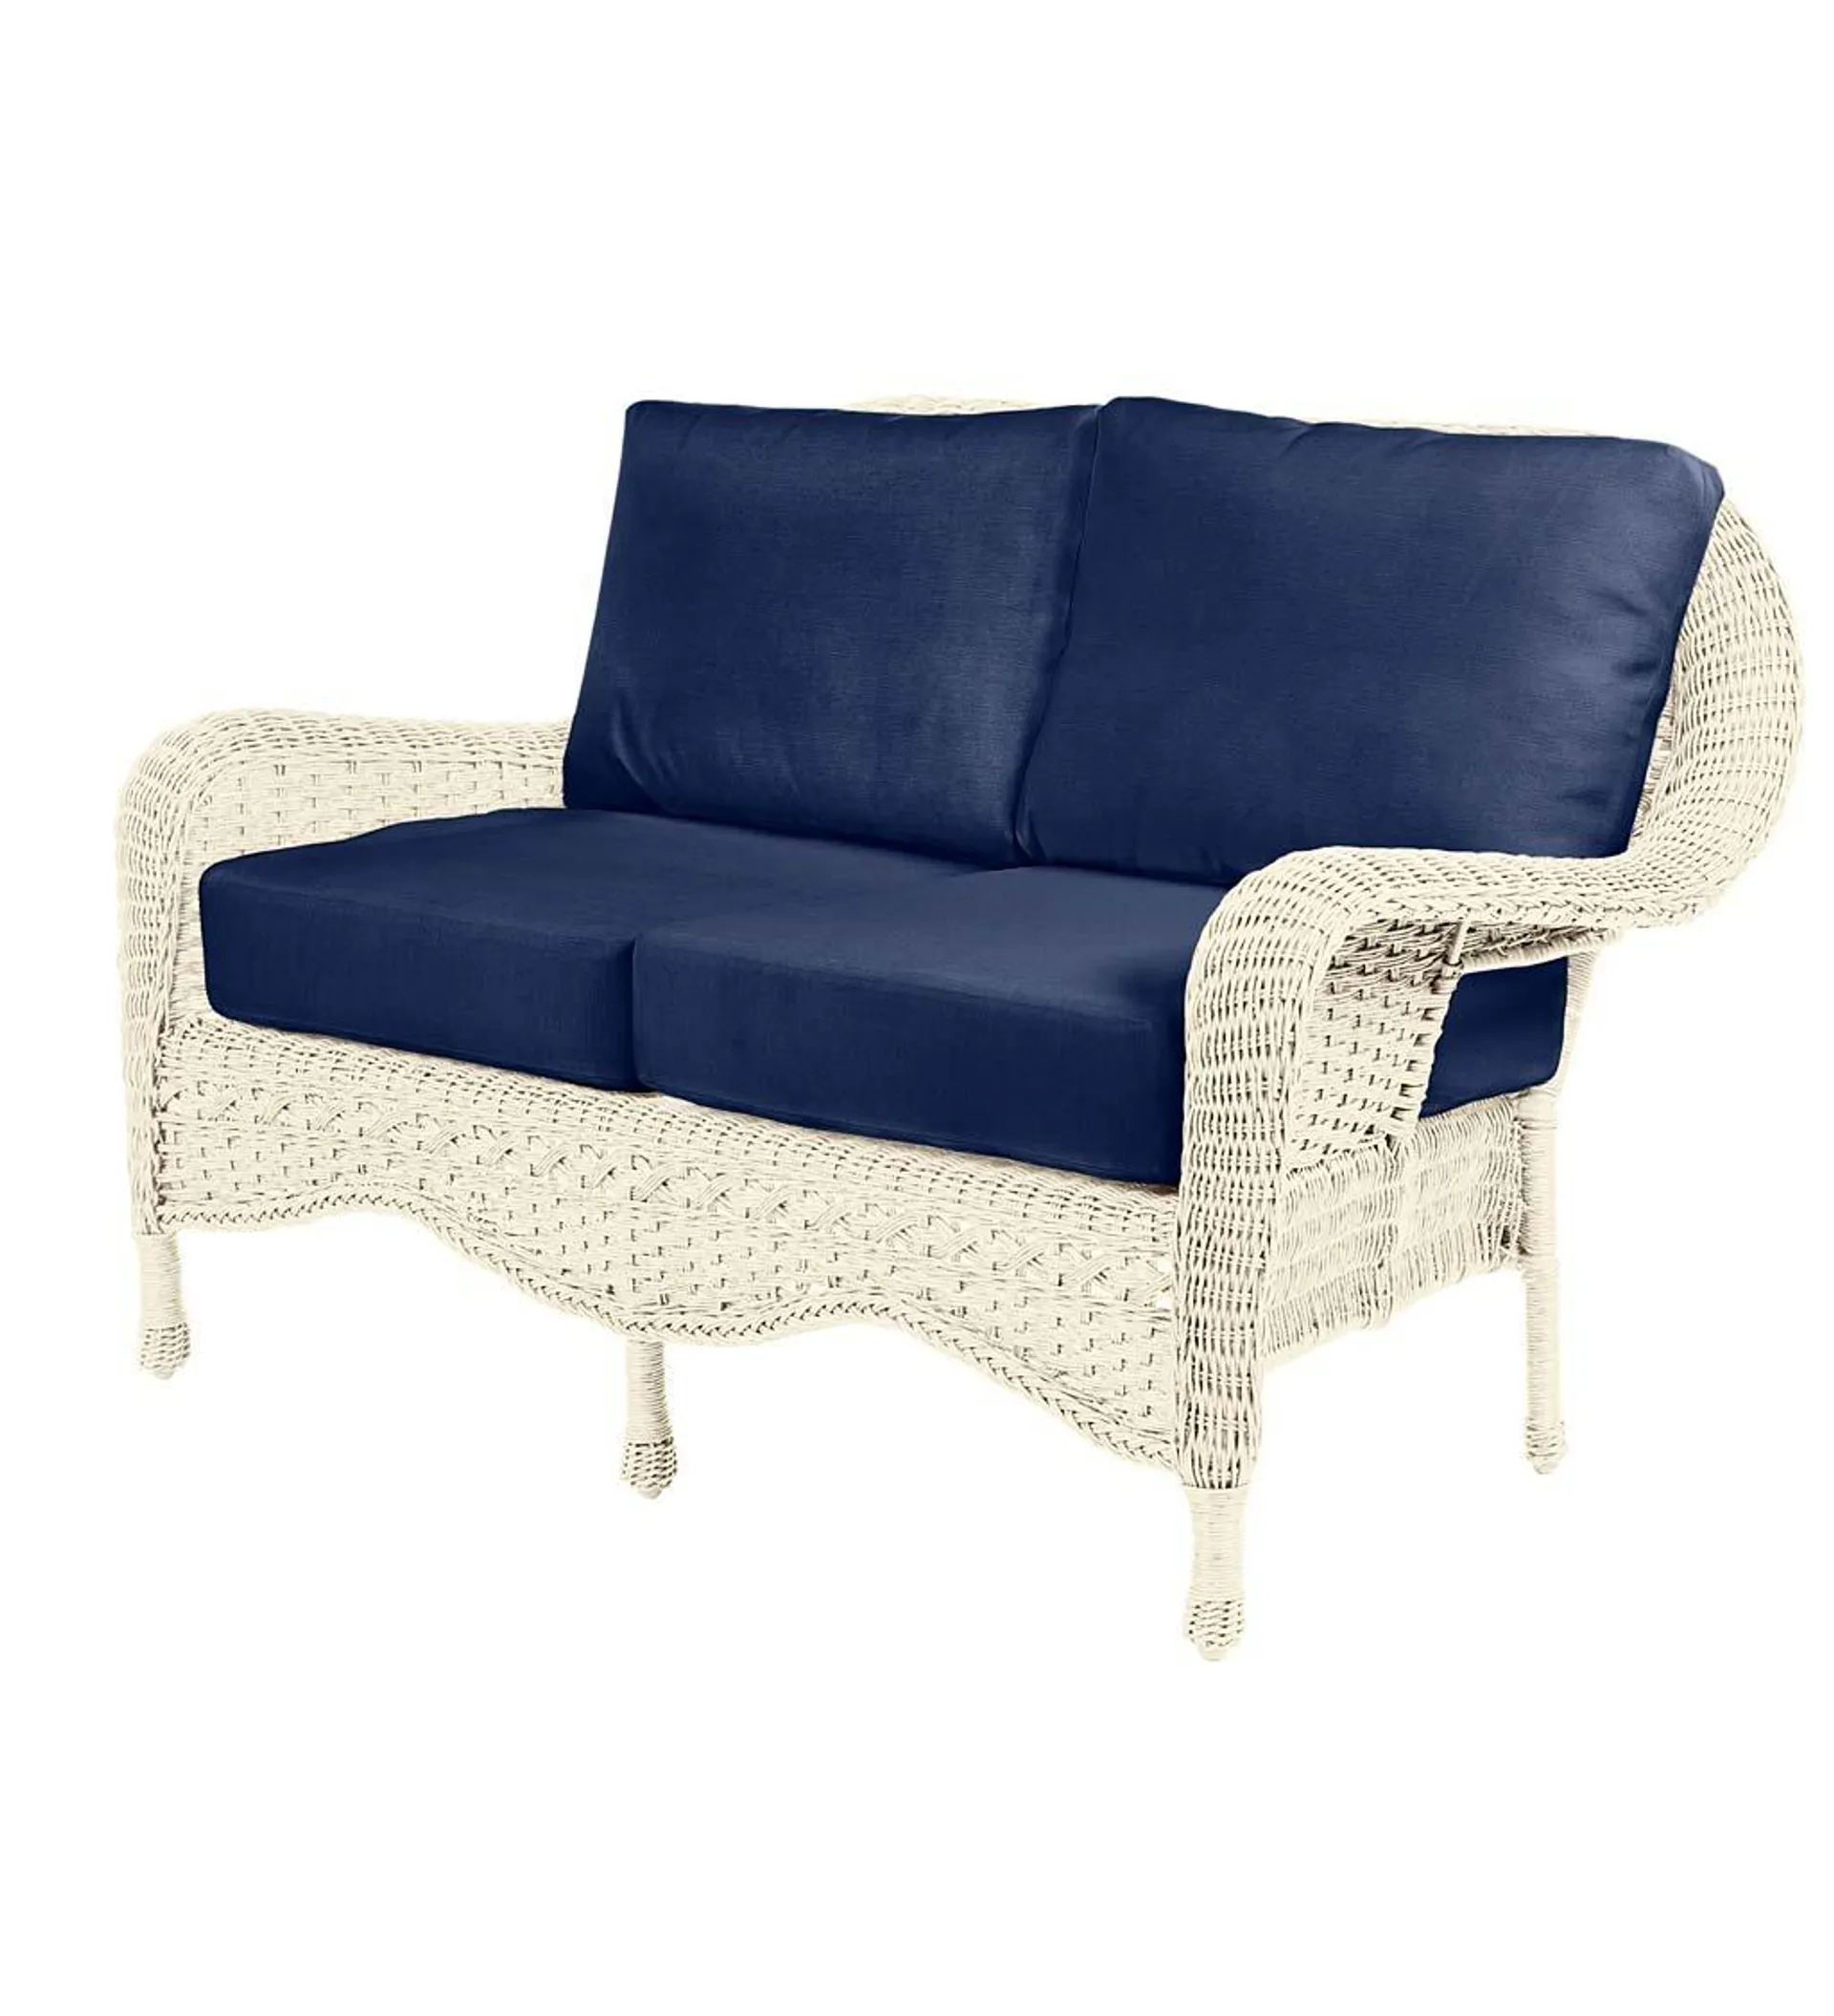 Prospect Hill Outdoor Wicker Deep Seating Love Seat with Cushions - Cloud White with Midnight Navy Cushions